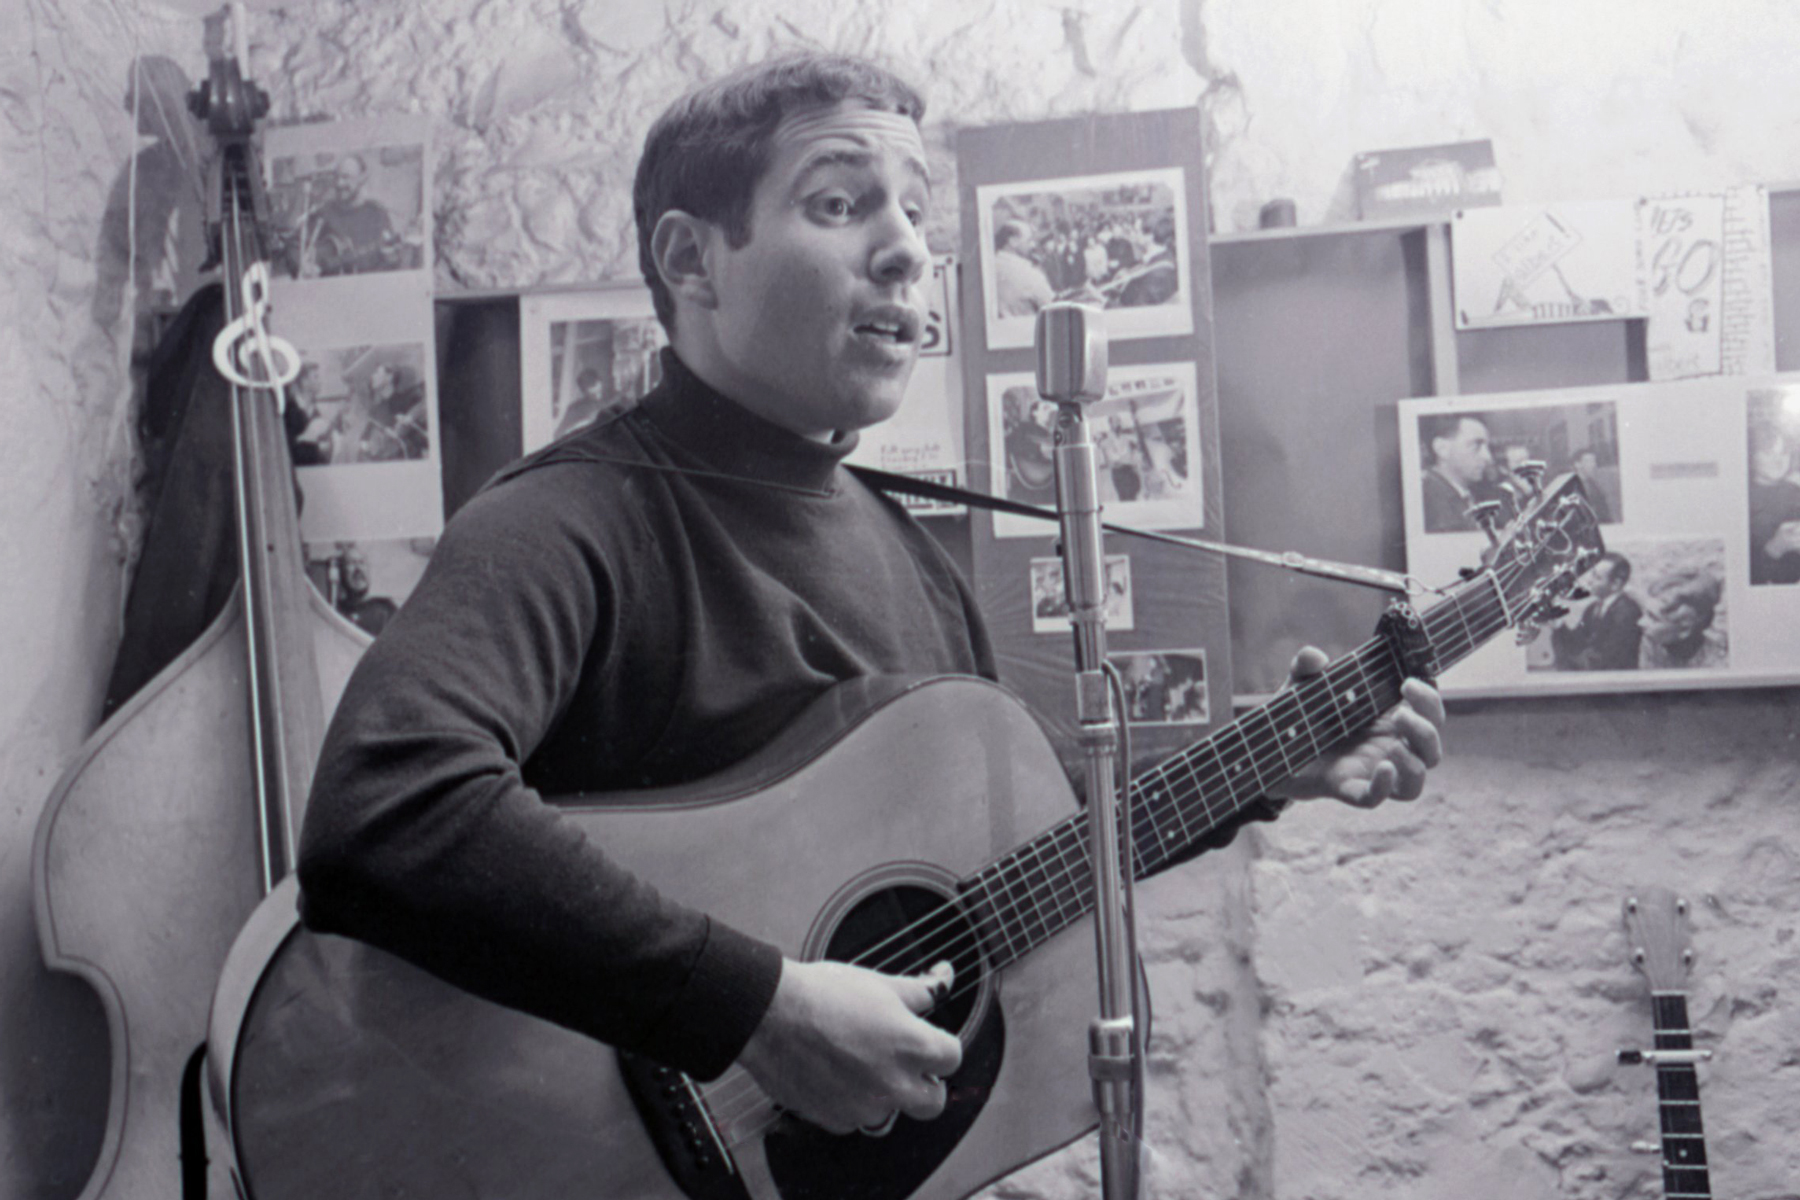 paul simon reflects on his nearly seven-decade career in new doc trailer